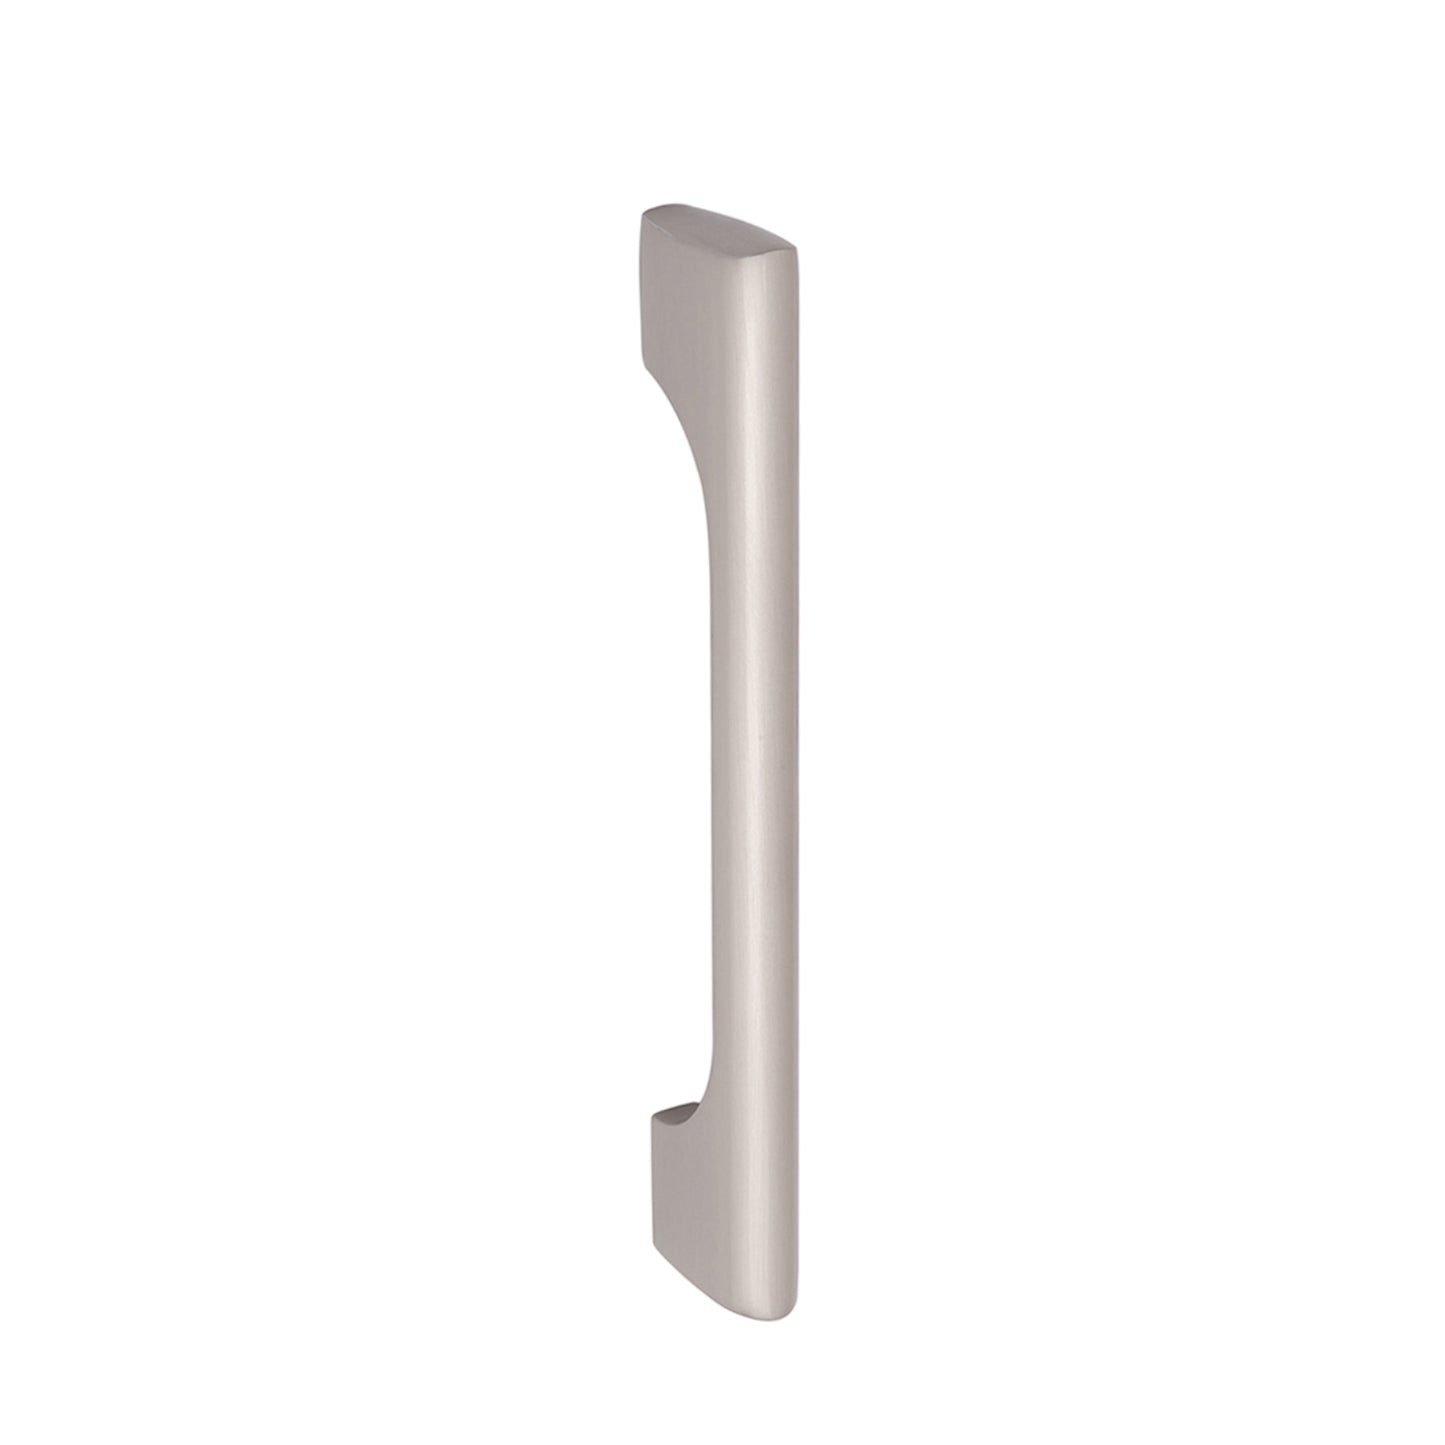 South Main Hardware Wide Die Cast Cabinet Handle, 6.57" Length (6.3" Hole Center), Satin Nickel, 10-Pack